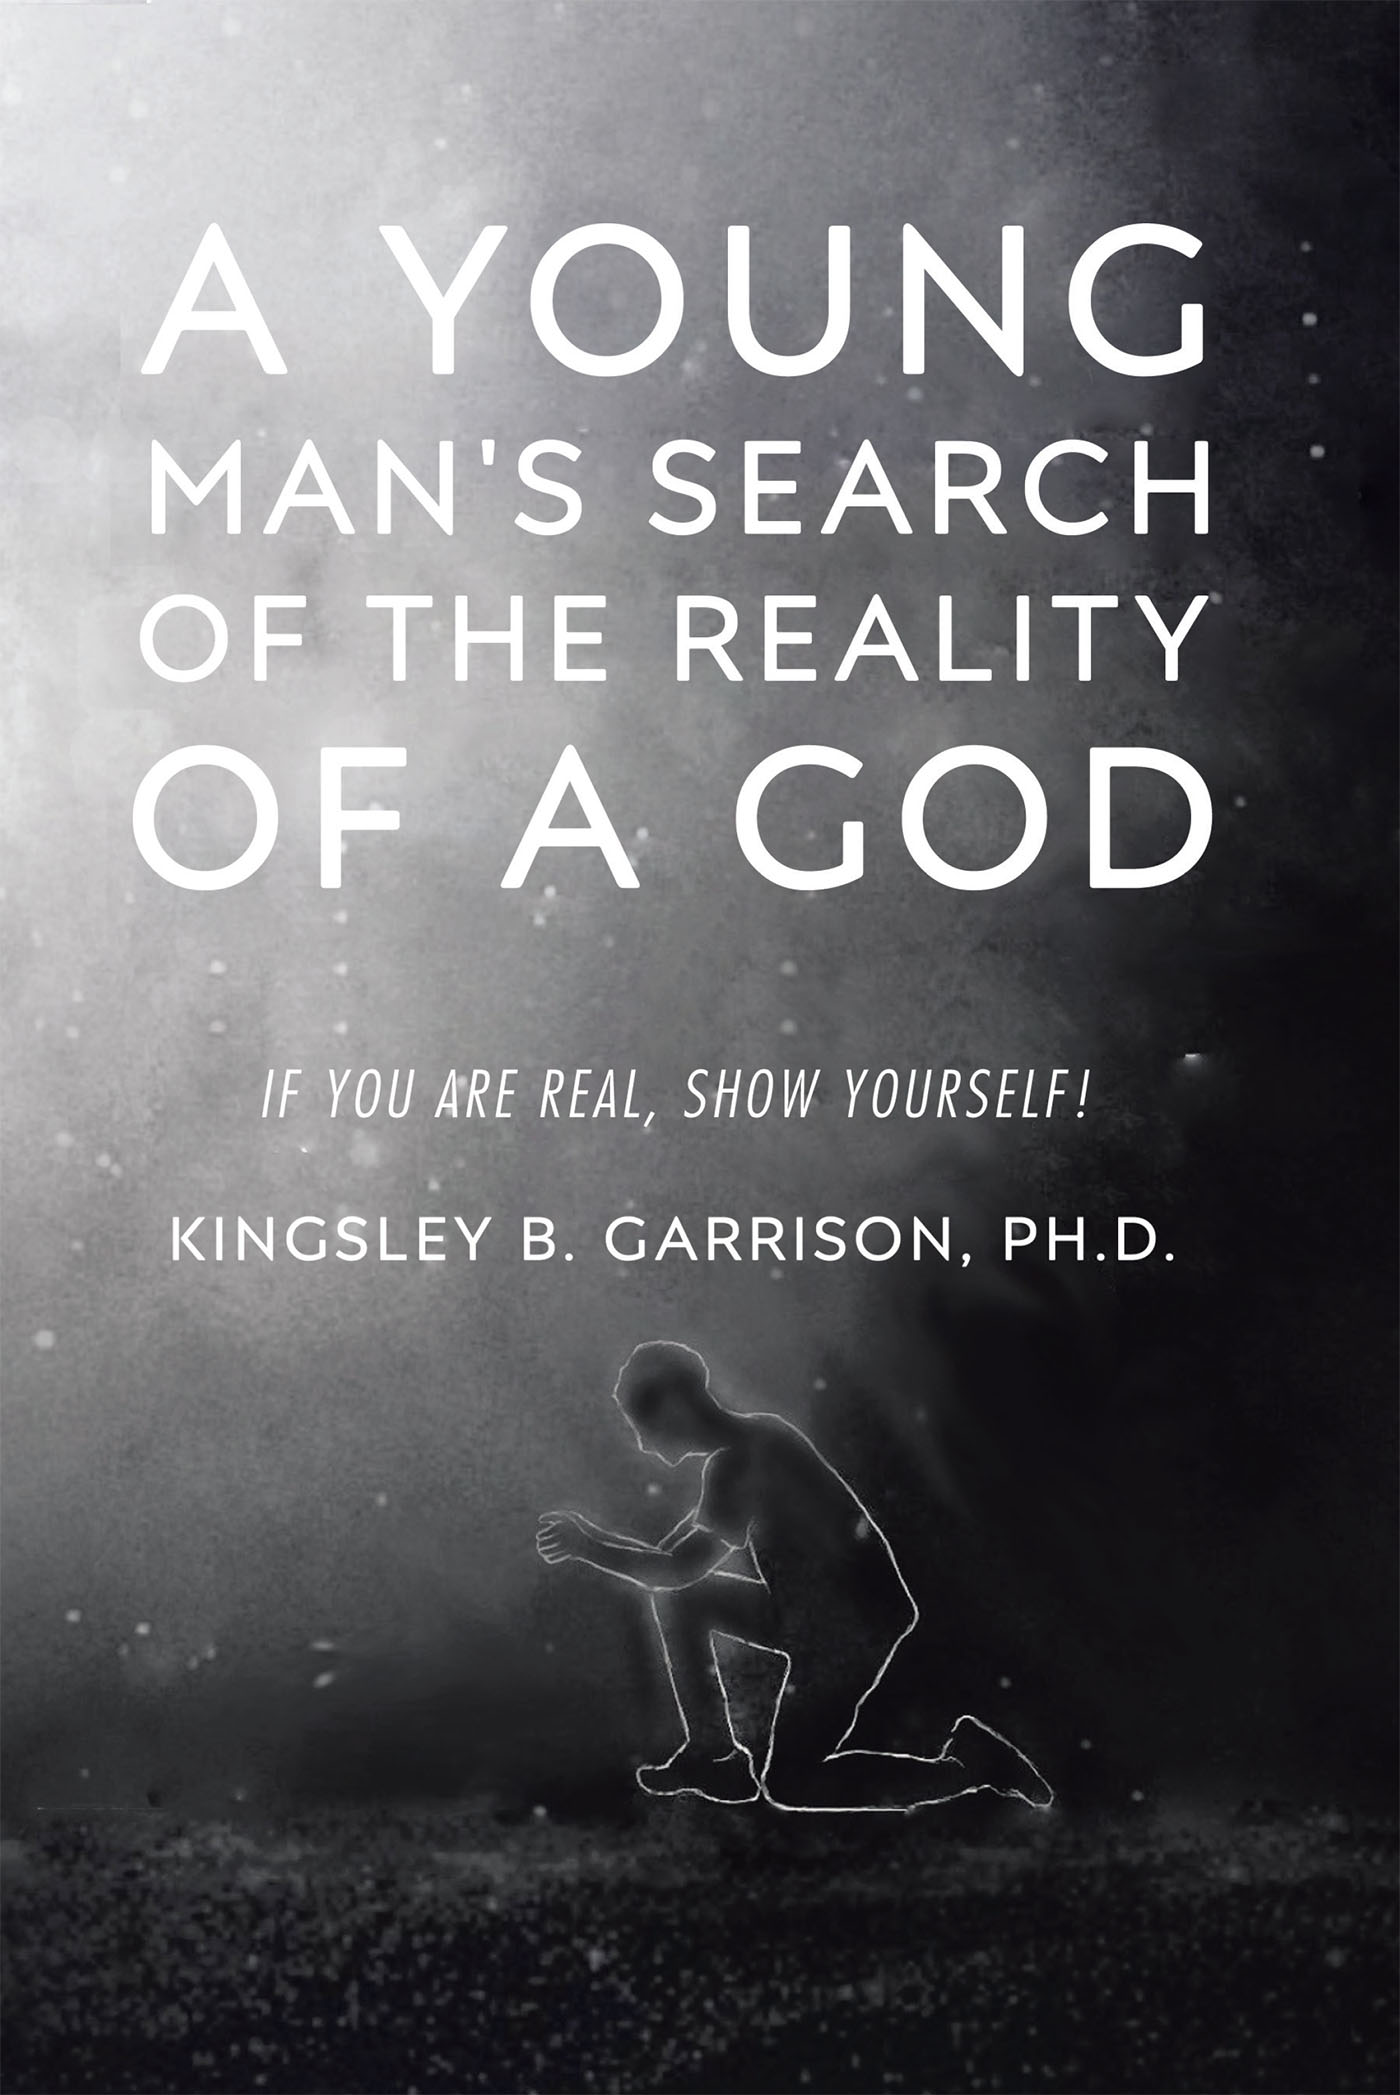 Kingsley B. Garrison, Ph.D.’s Newly Released “A Young Man’s Search of the Reality of a God: If You Are Real, Show Yourself!” is an Inspiring Story of a Search for God